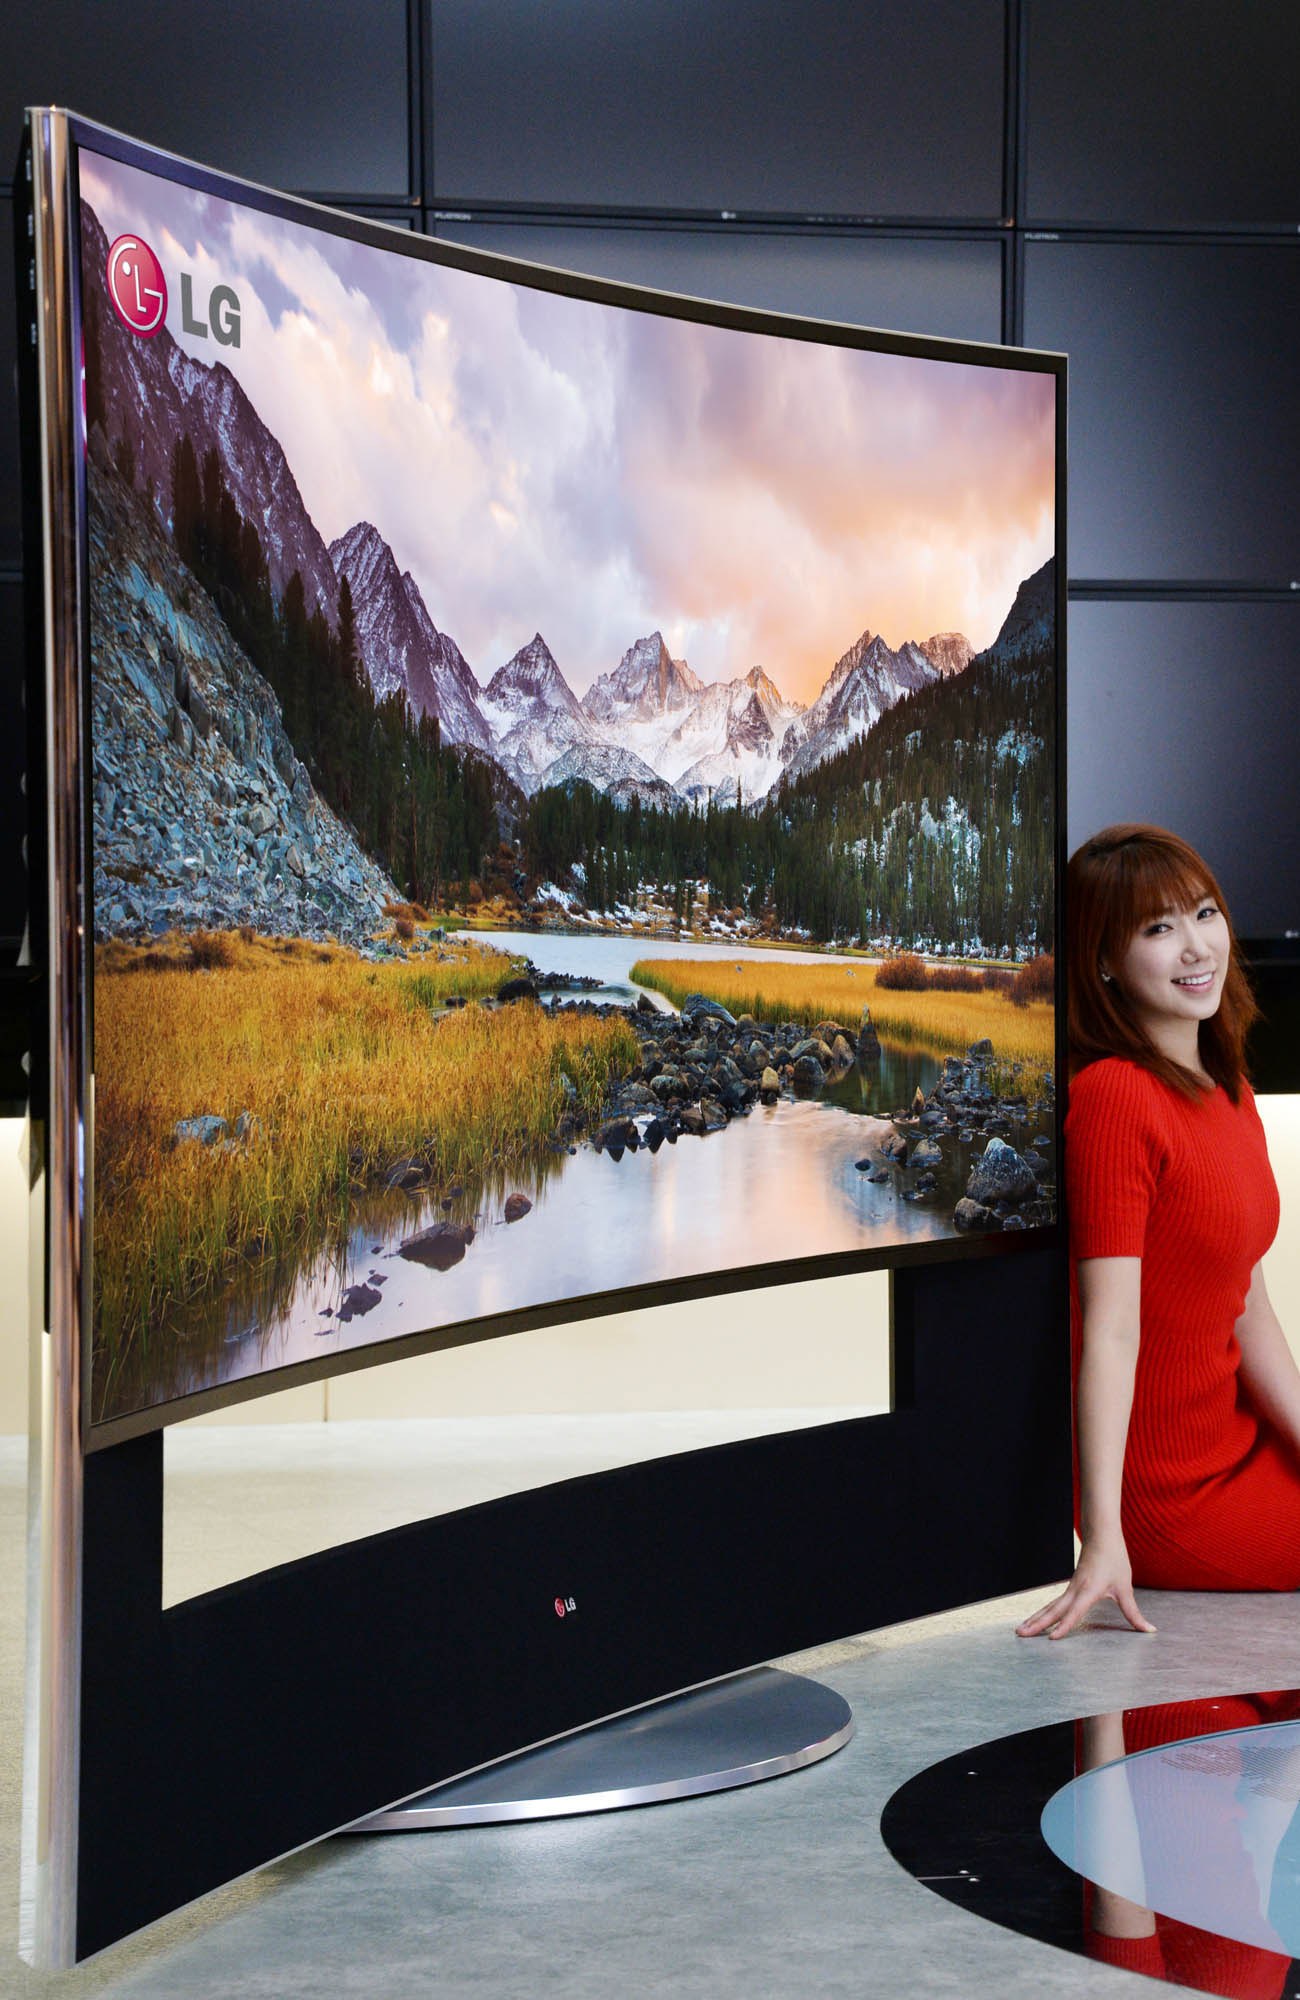 LG’s 105-Inch Curved UltraHD LCD TV Is Just Bonkers